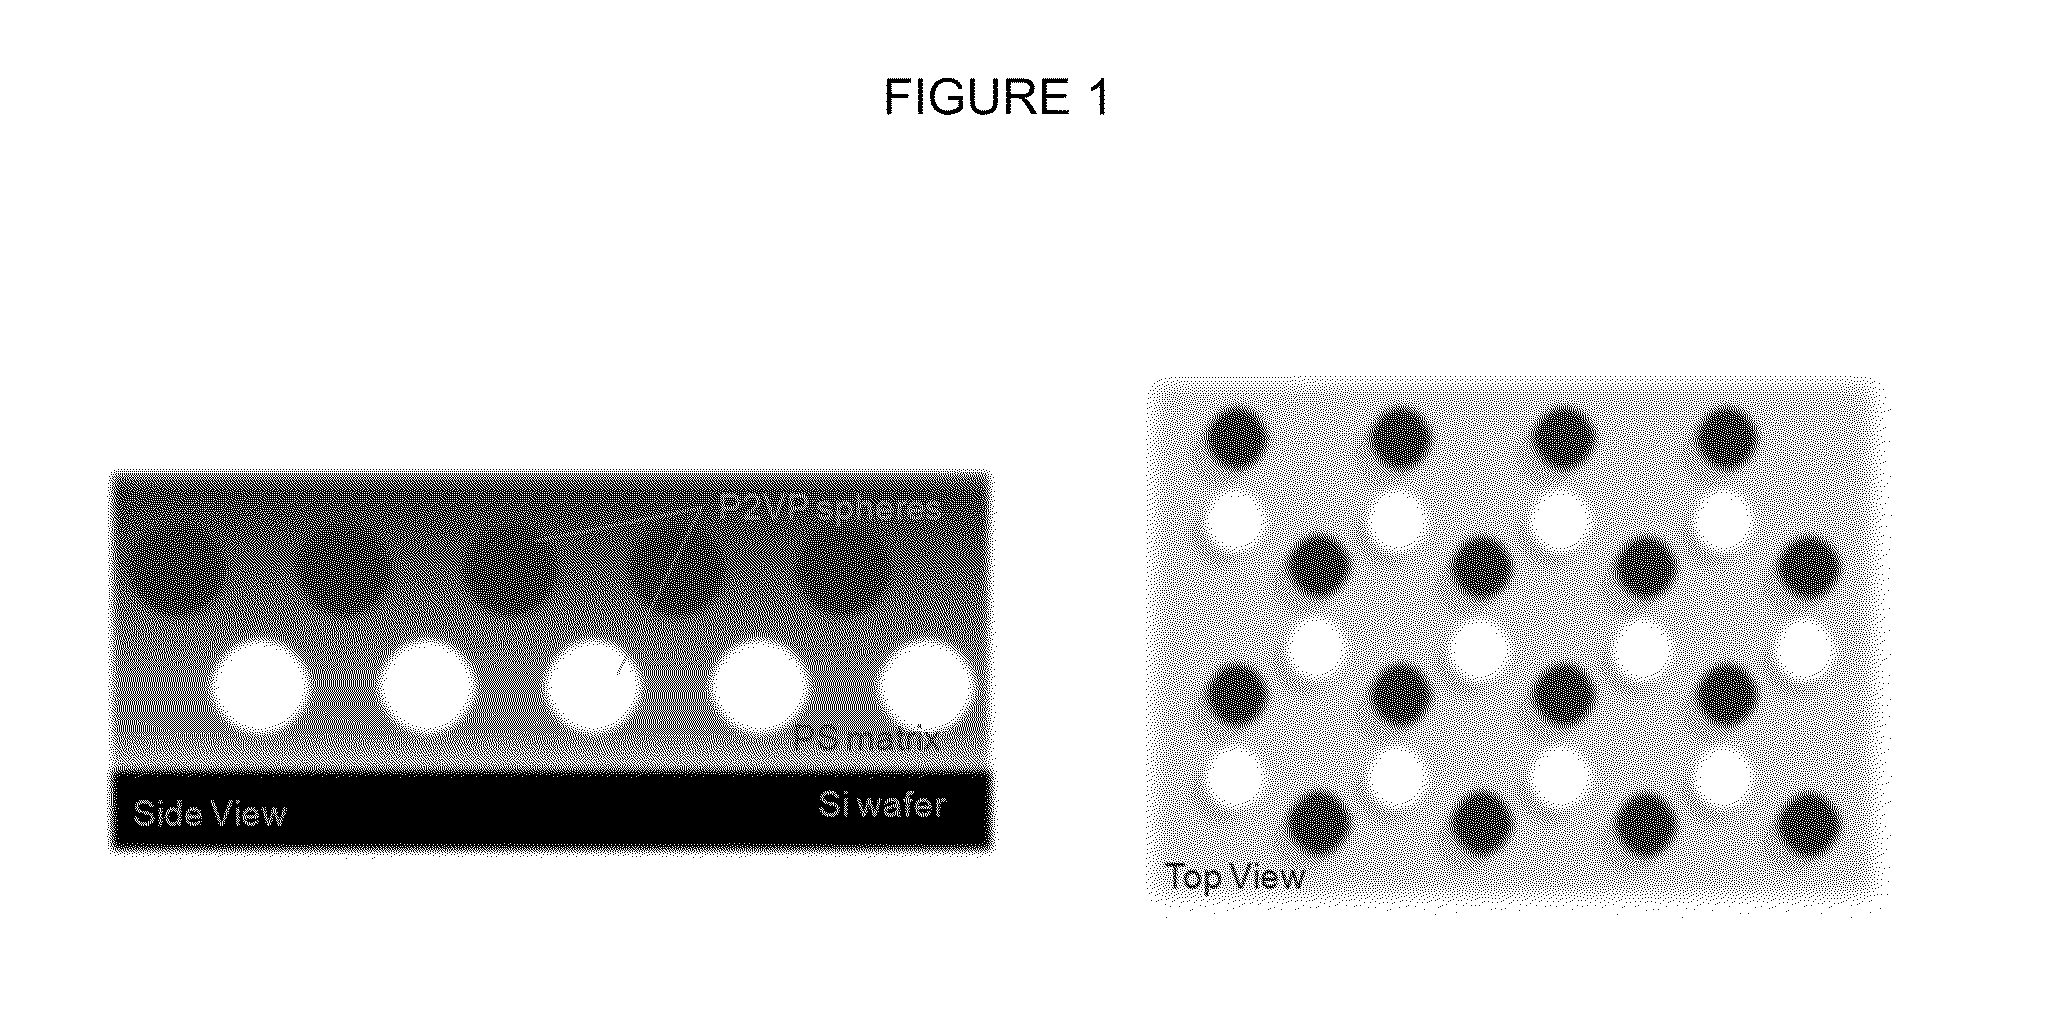 Method for forming a block copolymer pattern